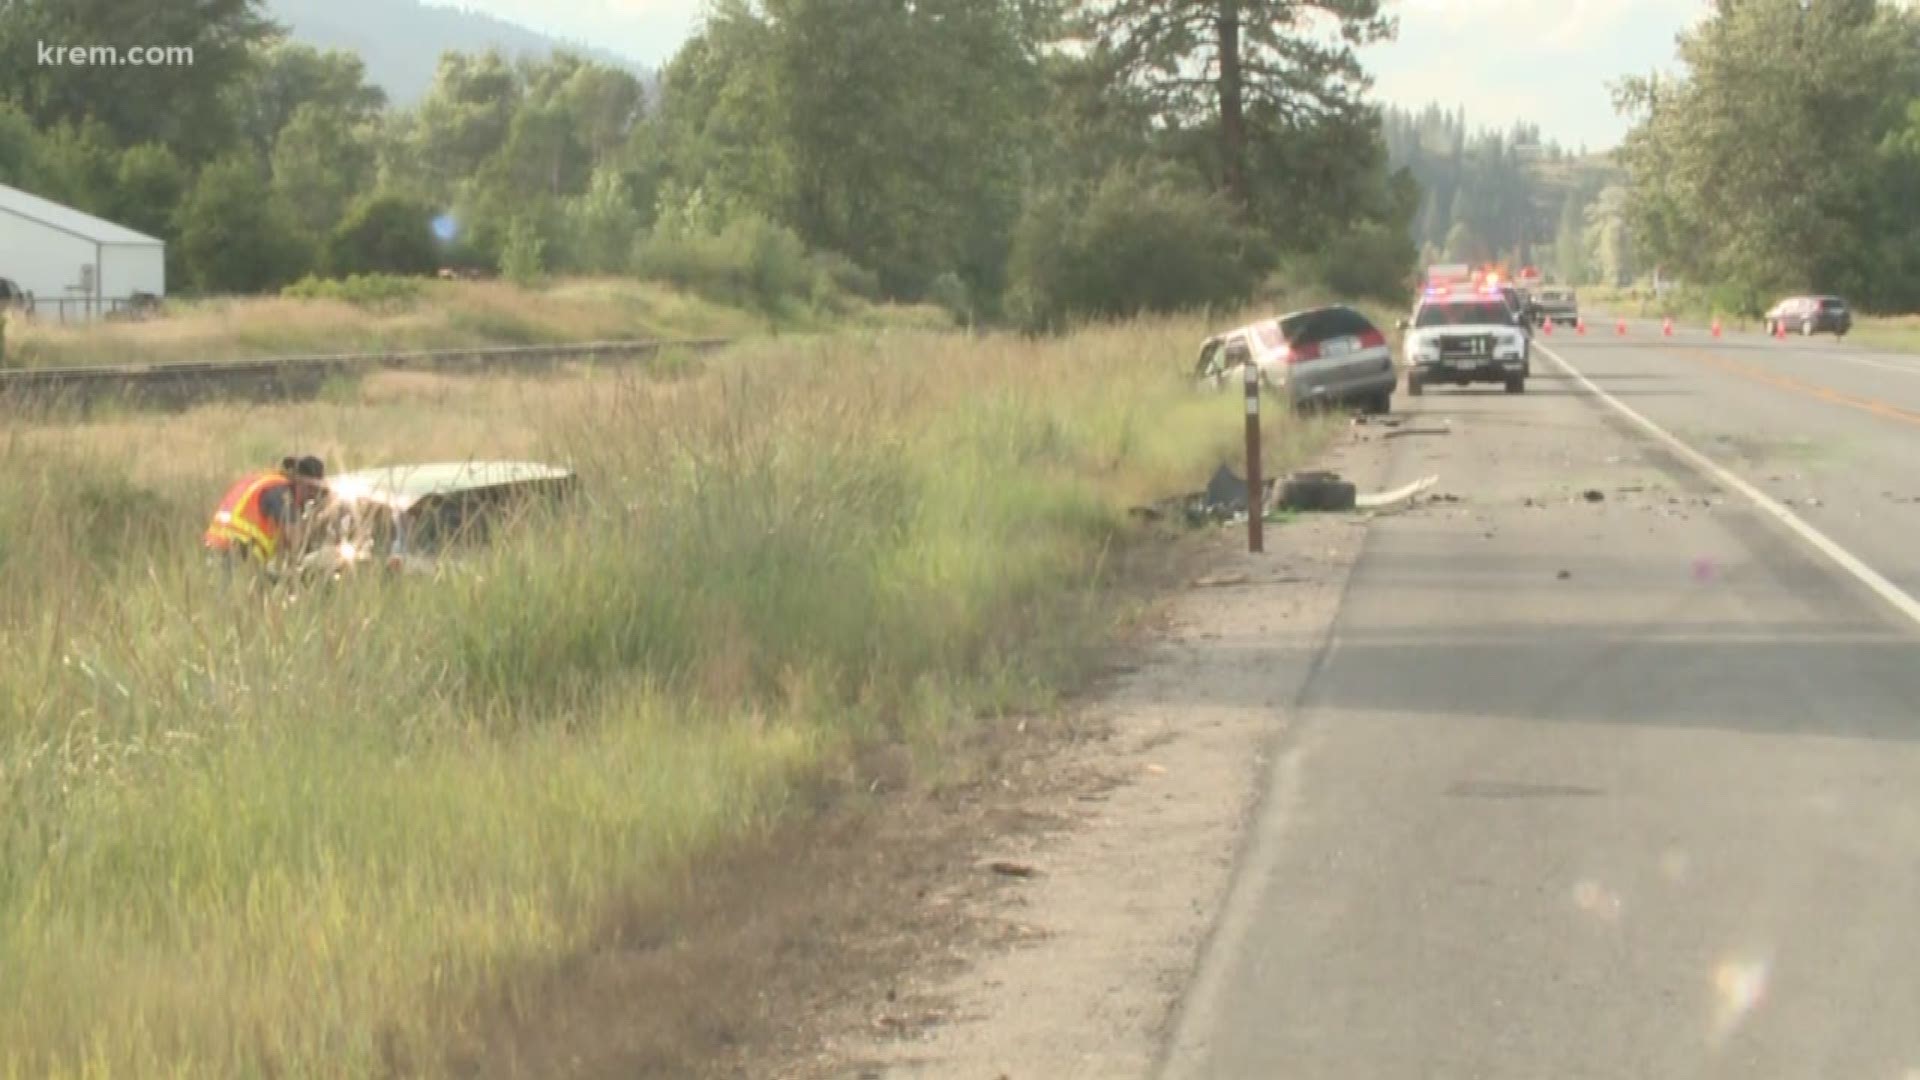 Troopers on scene said a car with three people inside was headed northbound on Highway 395 when it veered off and drove over the median.